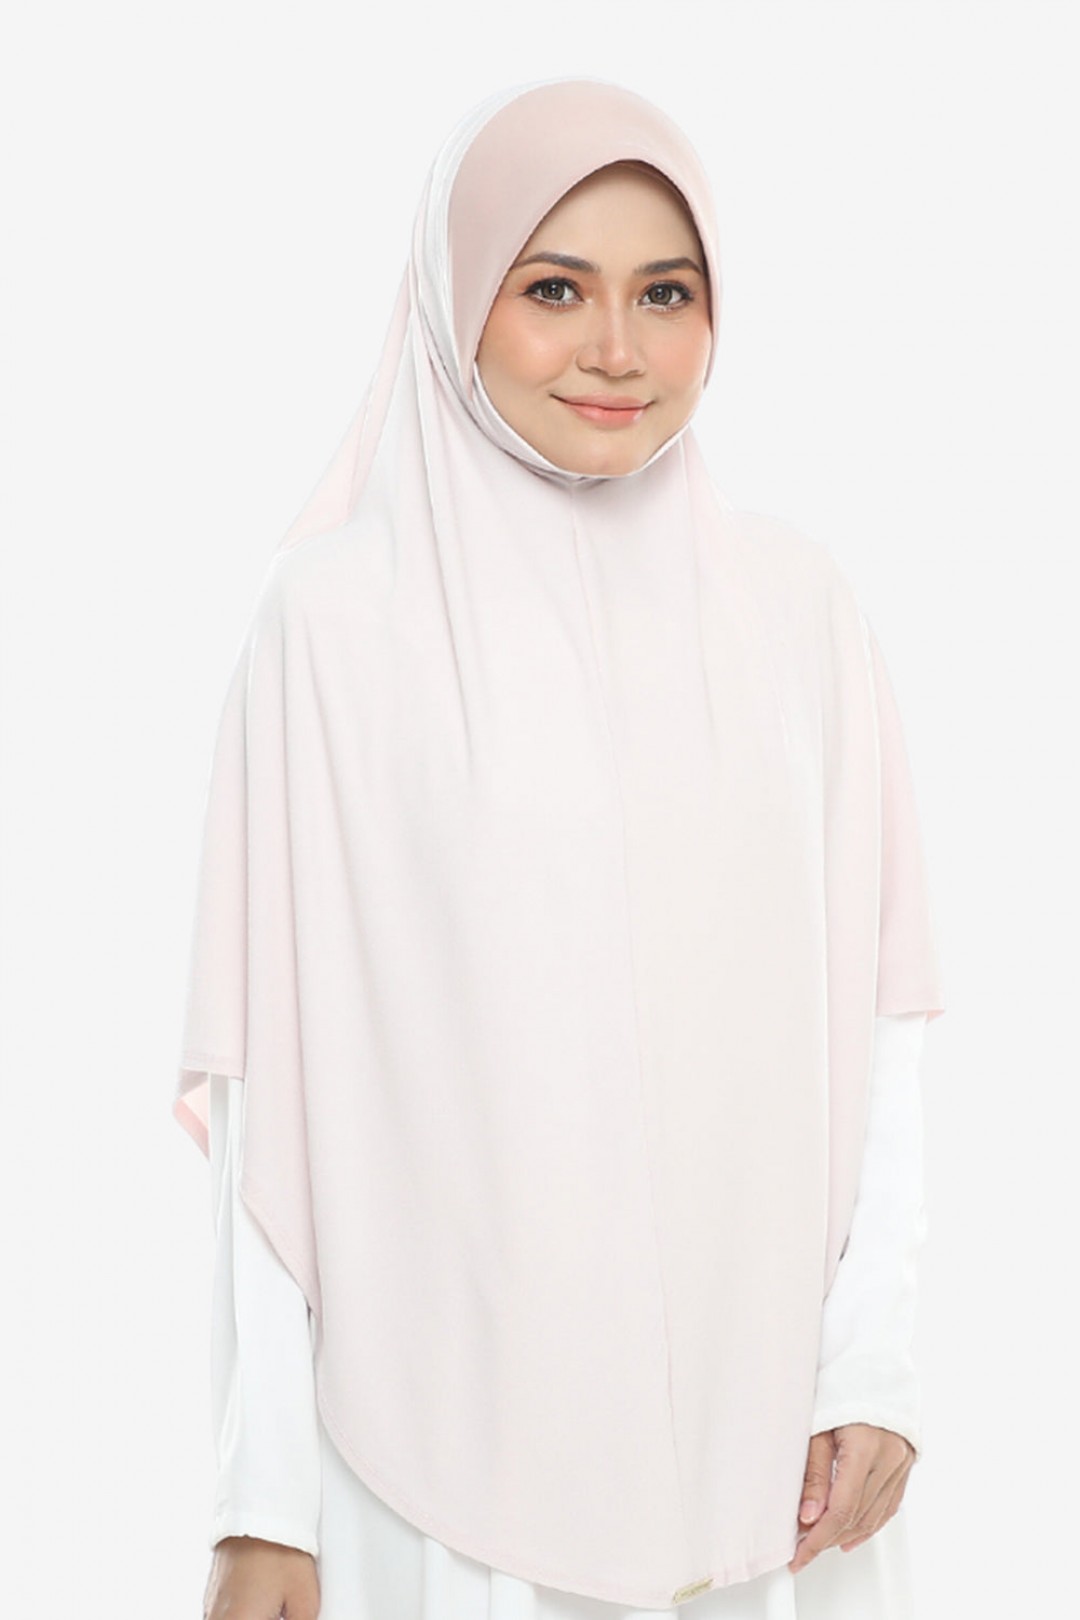 As-Is Sarung Qalansiyyah Pinky Beige